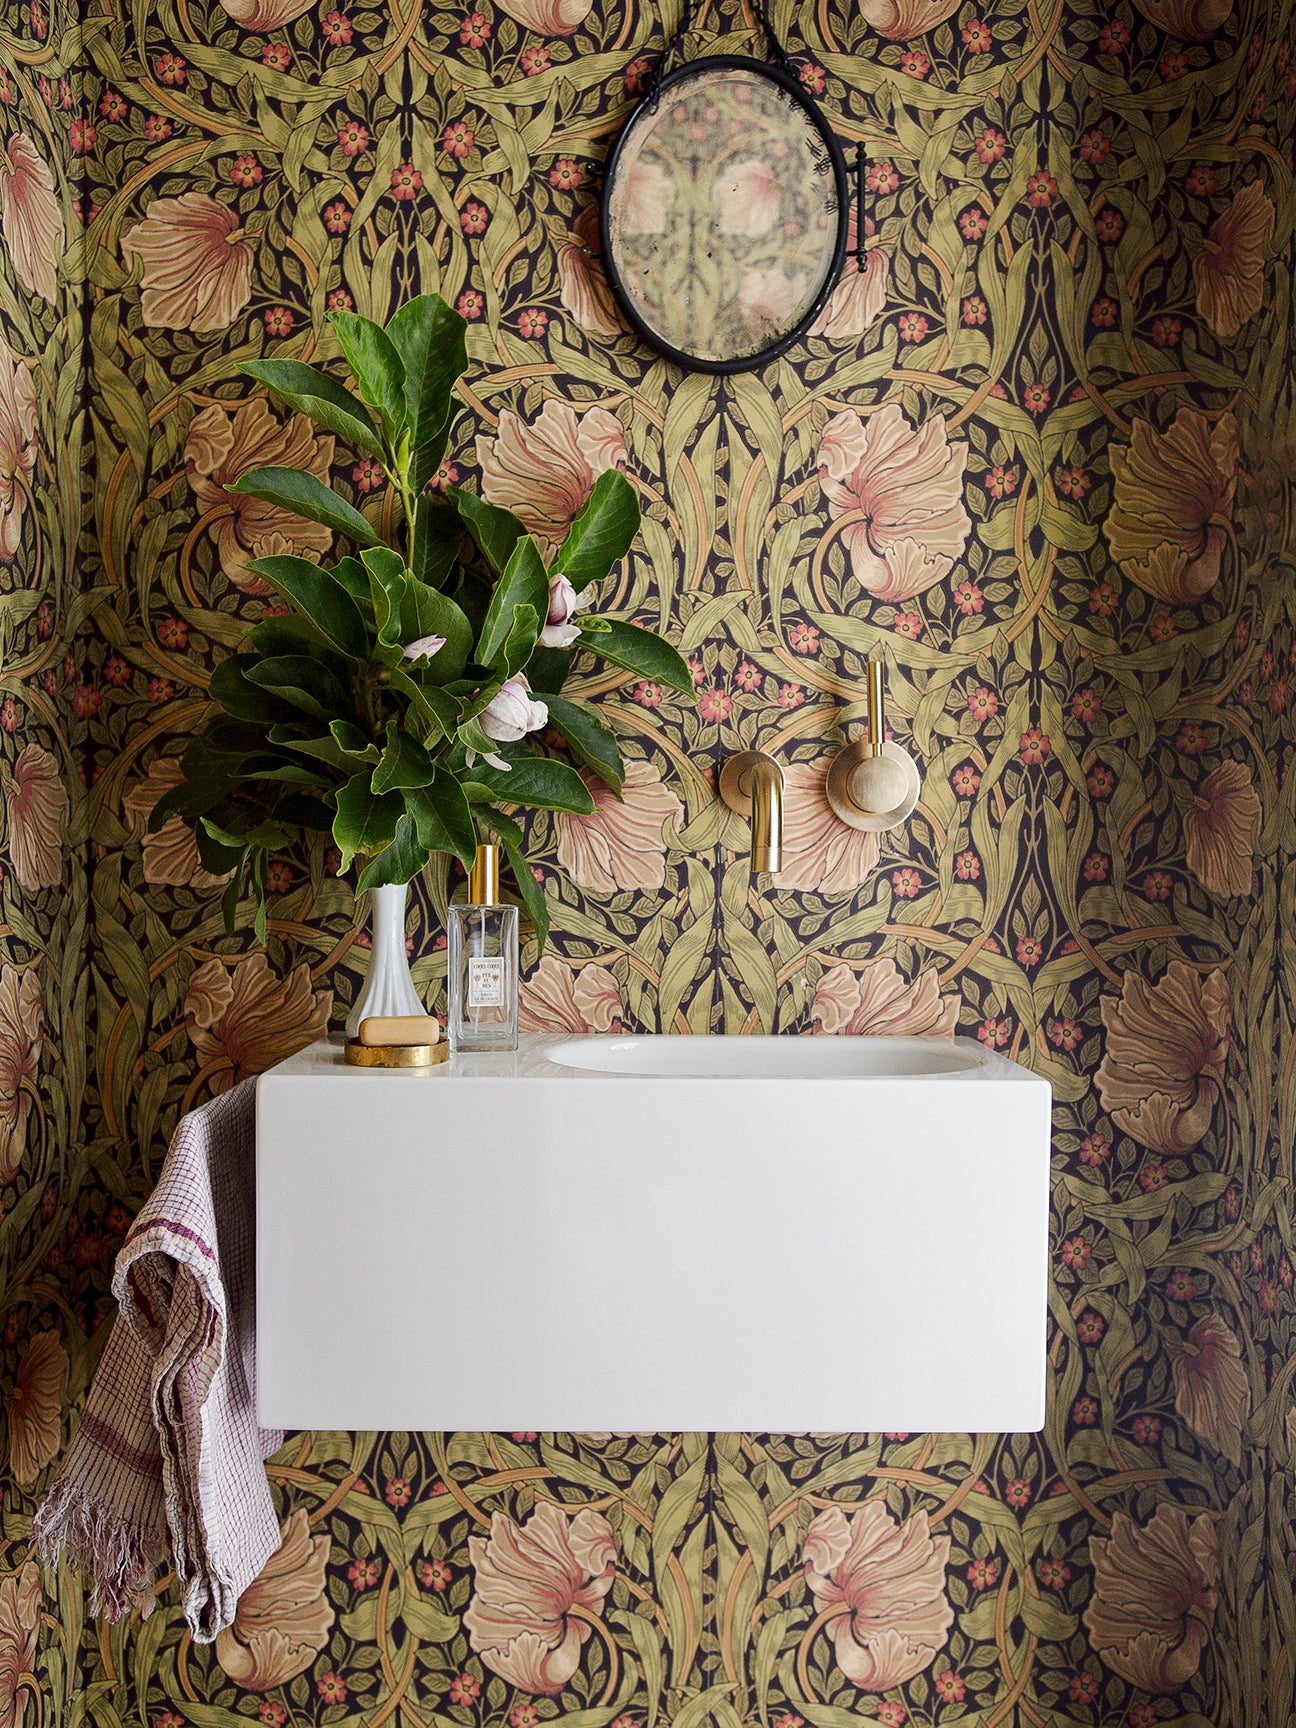 Powder room with floral wallpaper